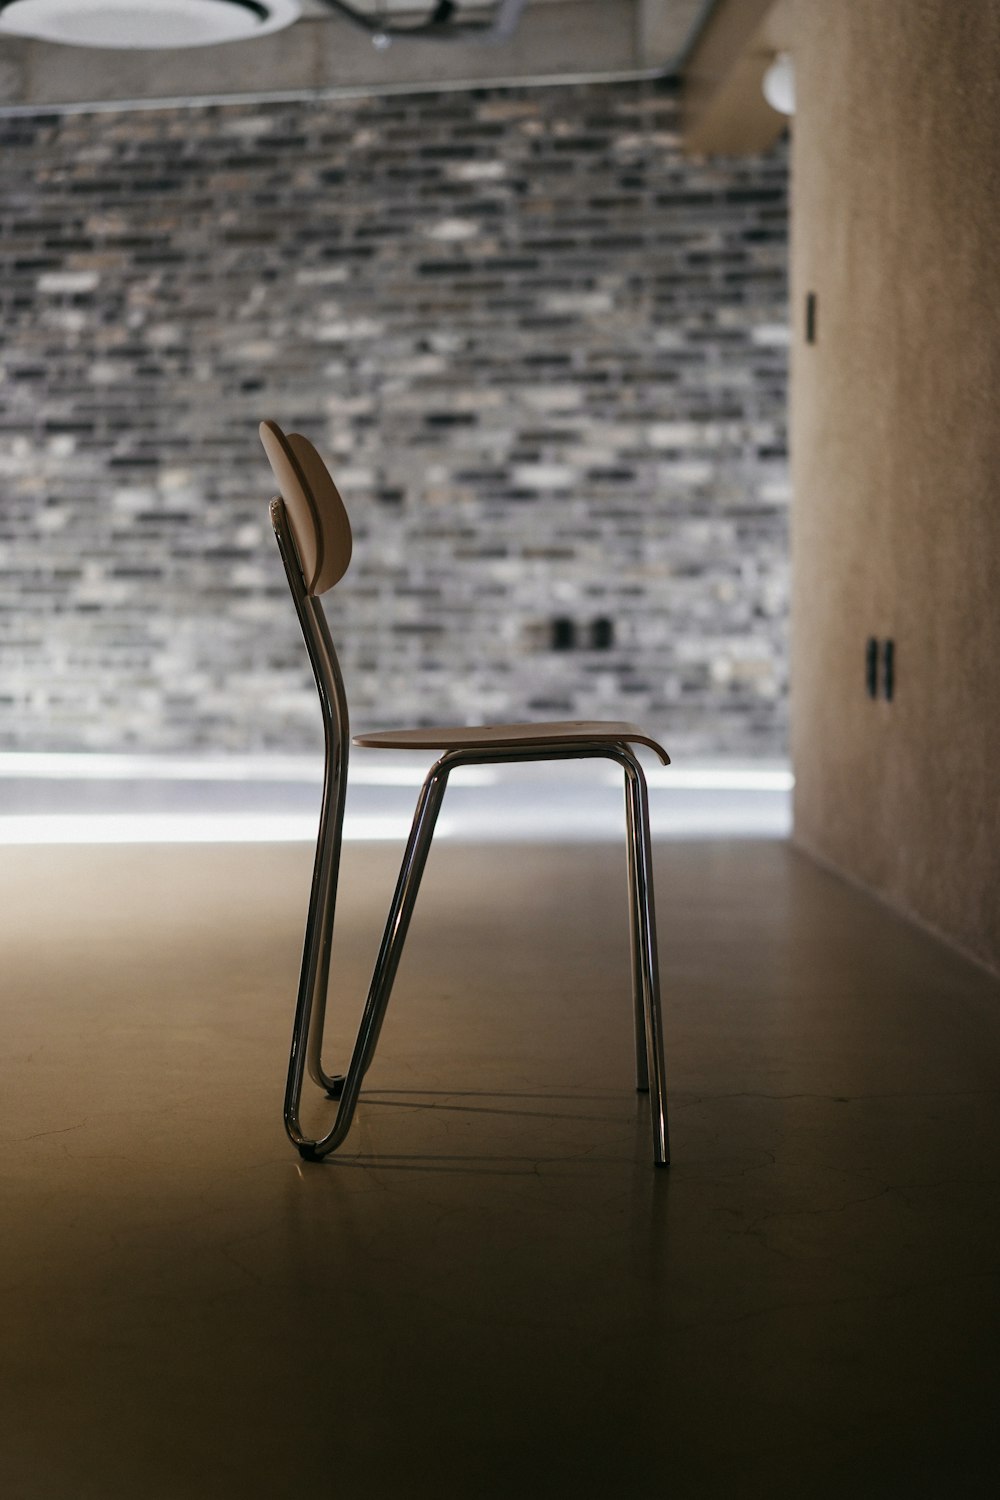 stainless steel chair beside brown wooden wall